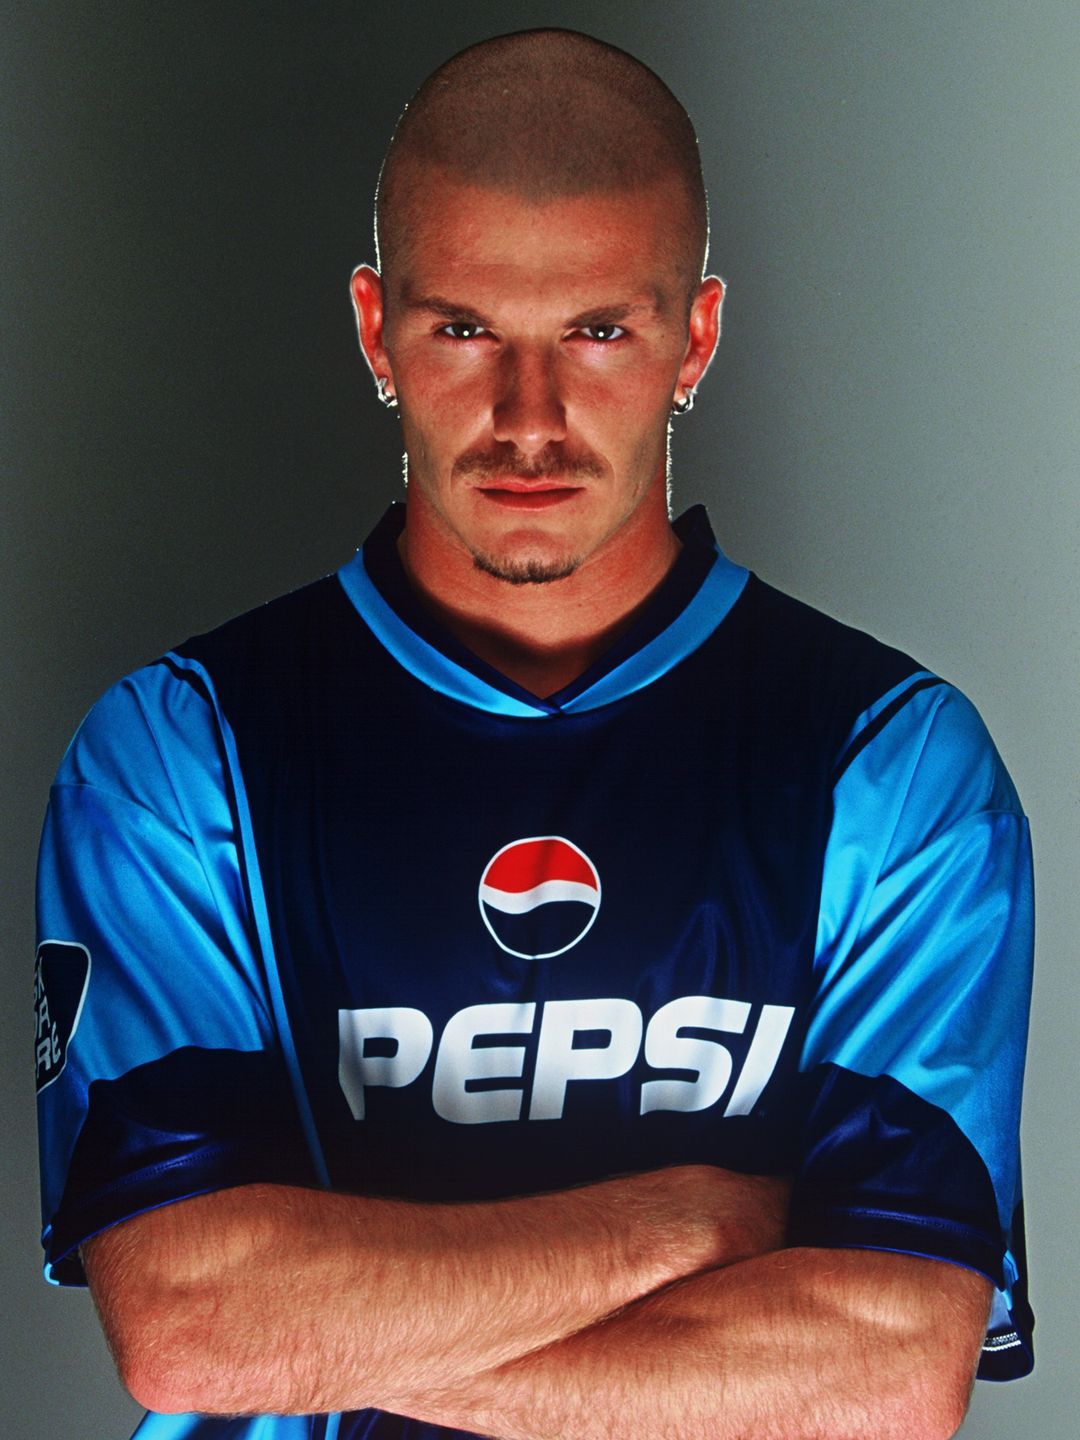 David Beckham of England poses for Pepsi's 'Share The Dream' 2002 advertising campaign in Manchester, England on October 15, 2001